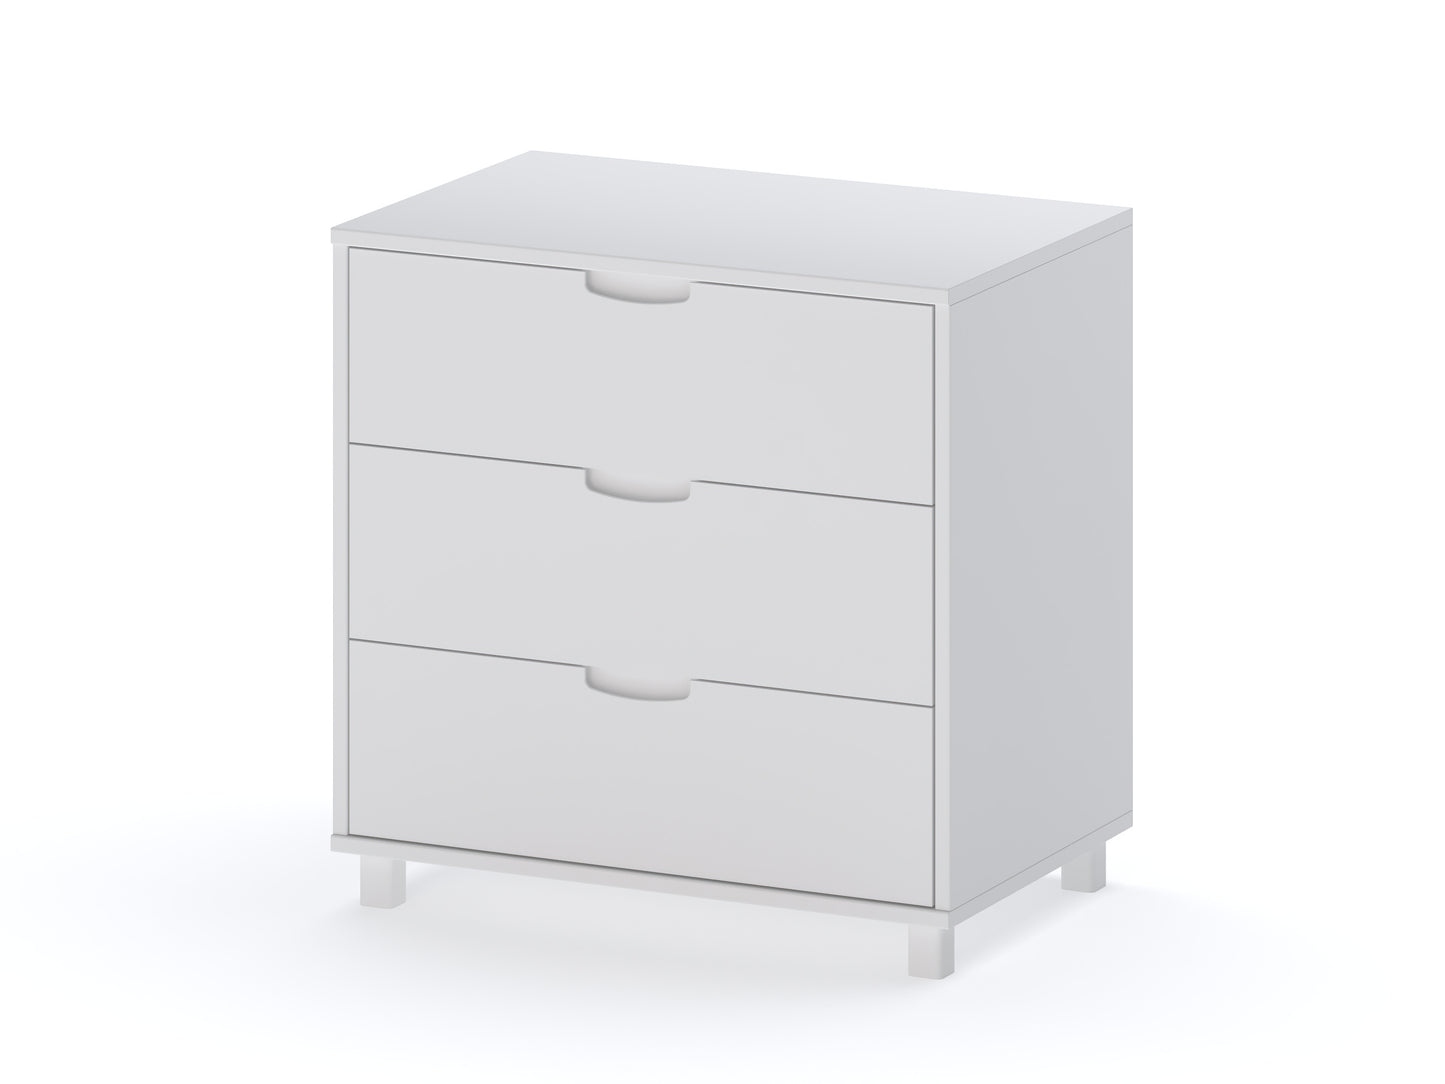 Scallywag Original 3 Chest of Drawers